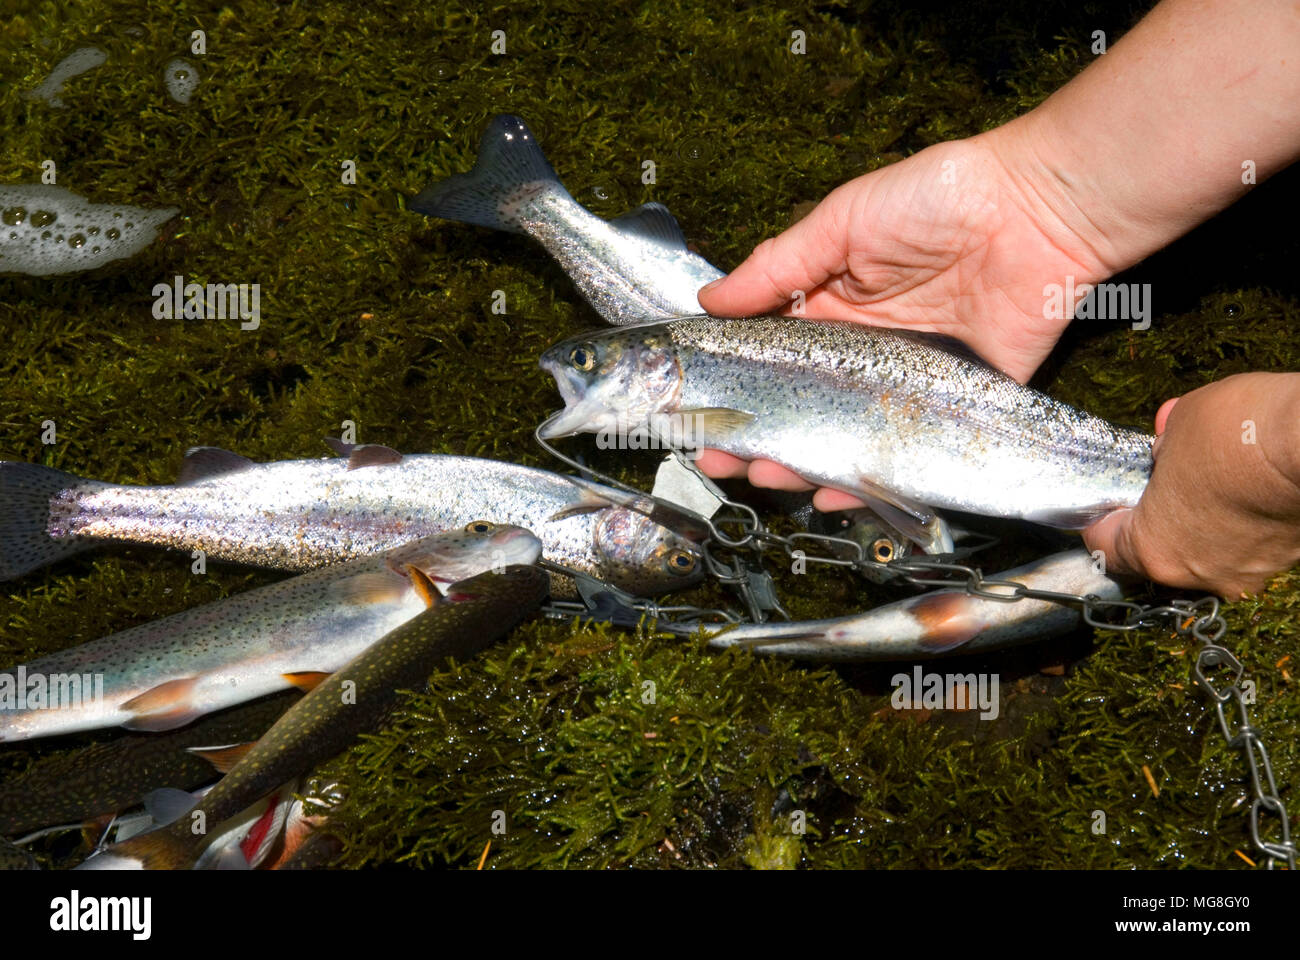 https://c8.alamy.com/comp/MG8GY0/fish-stringer-with-trout-mckenzie-wild-and-scenic-river-willamette-national-forest-oregon-MG8GY0.jpg